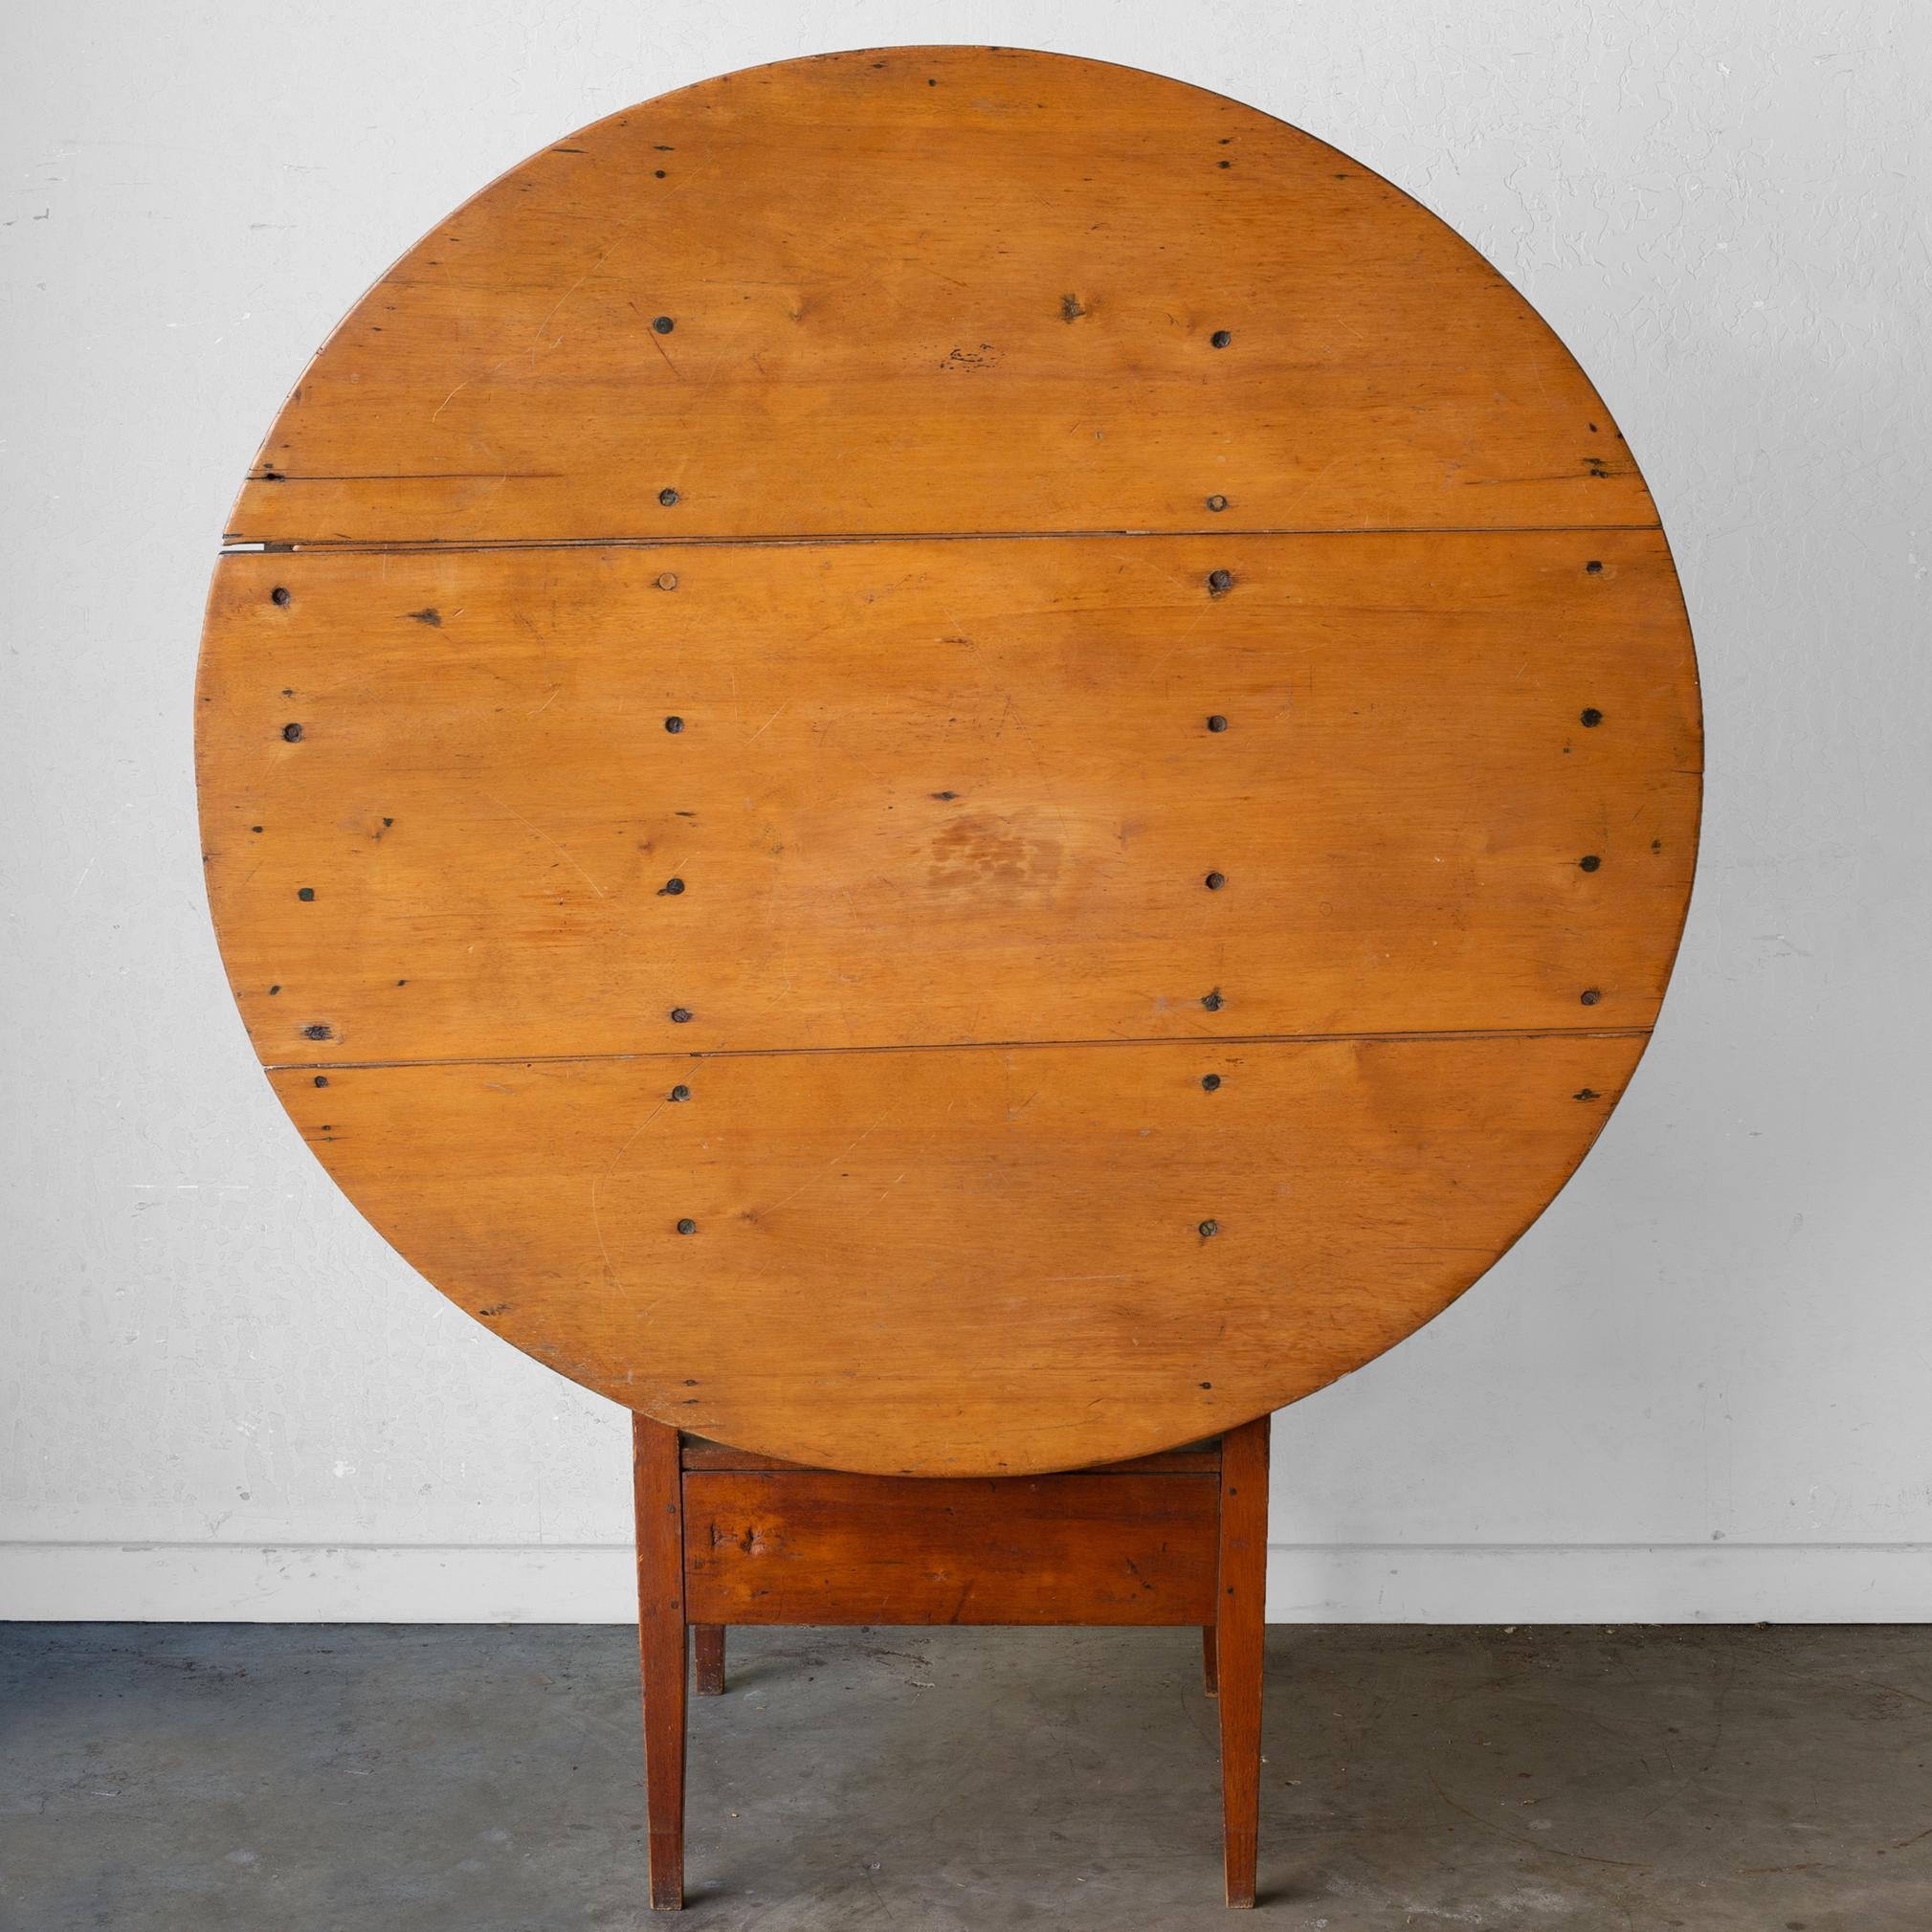 American Mid-18th Century Round Flip Top Hutch Table with Original Paint, circa 1750